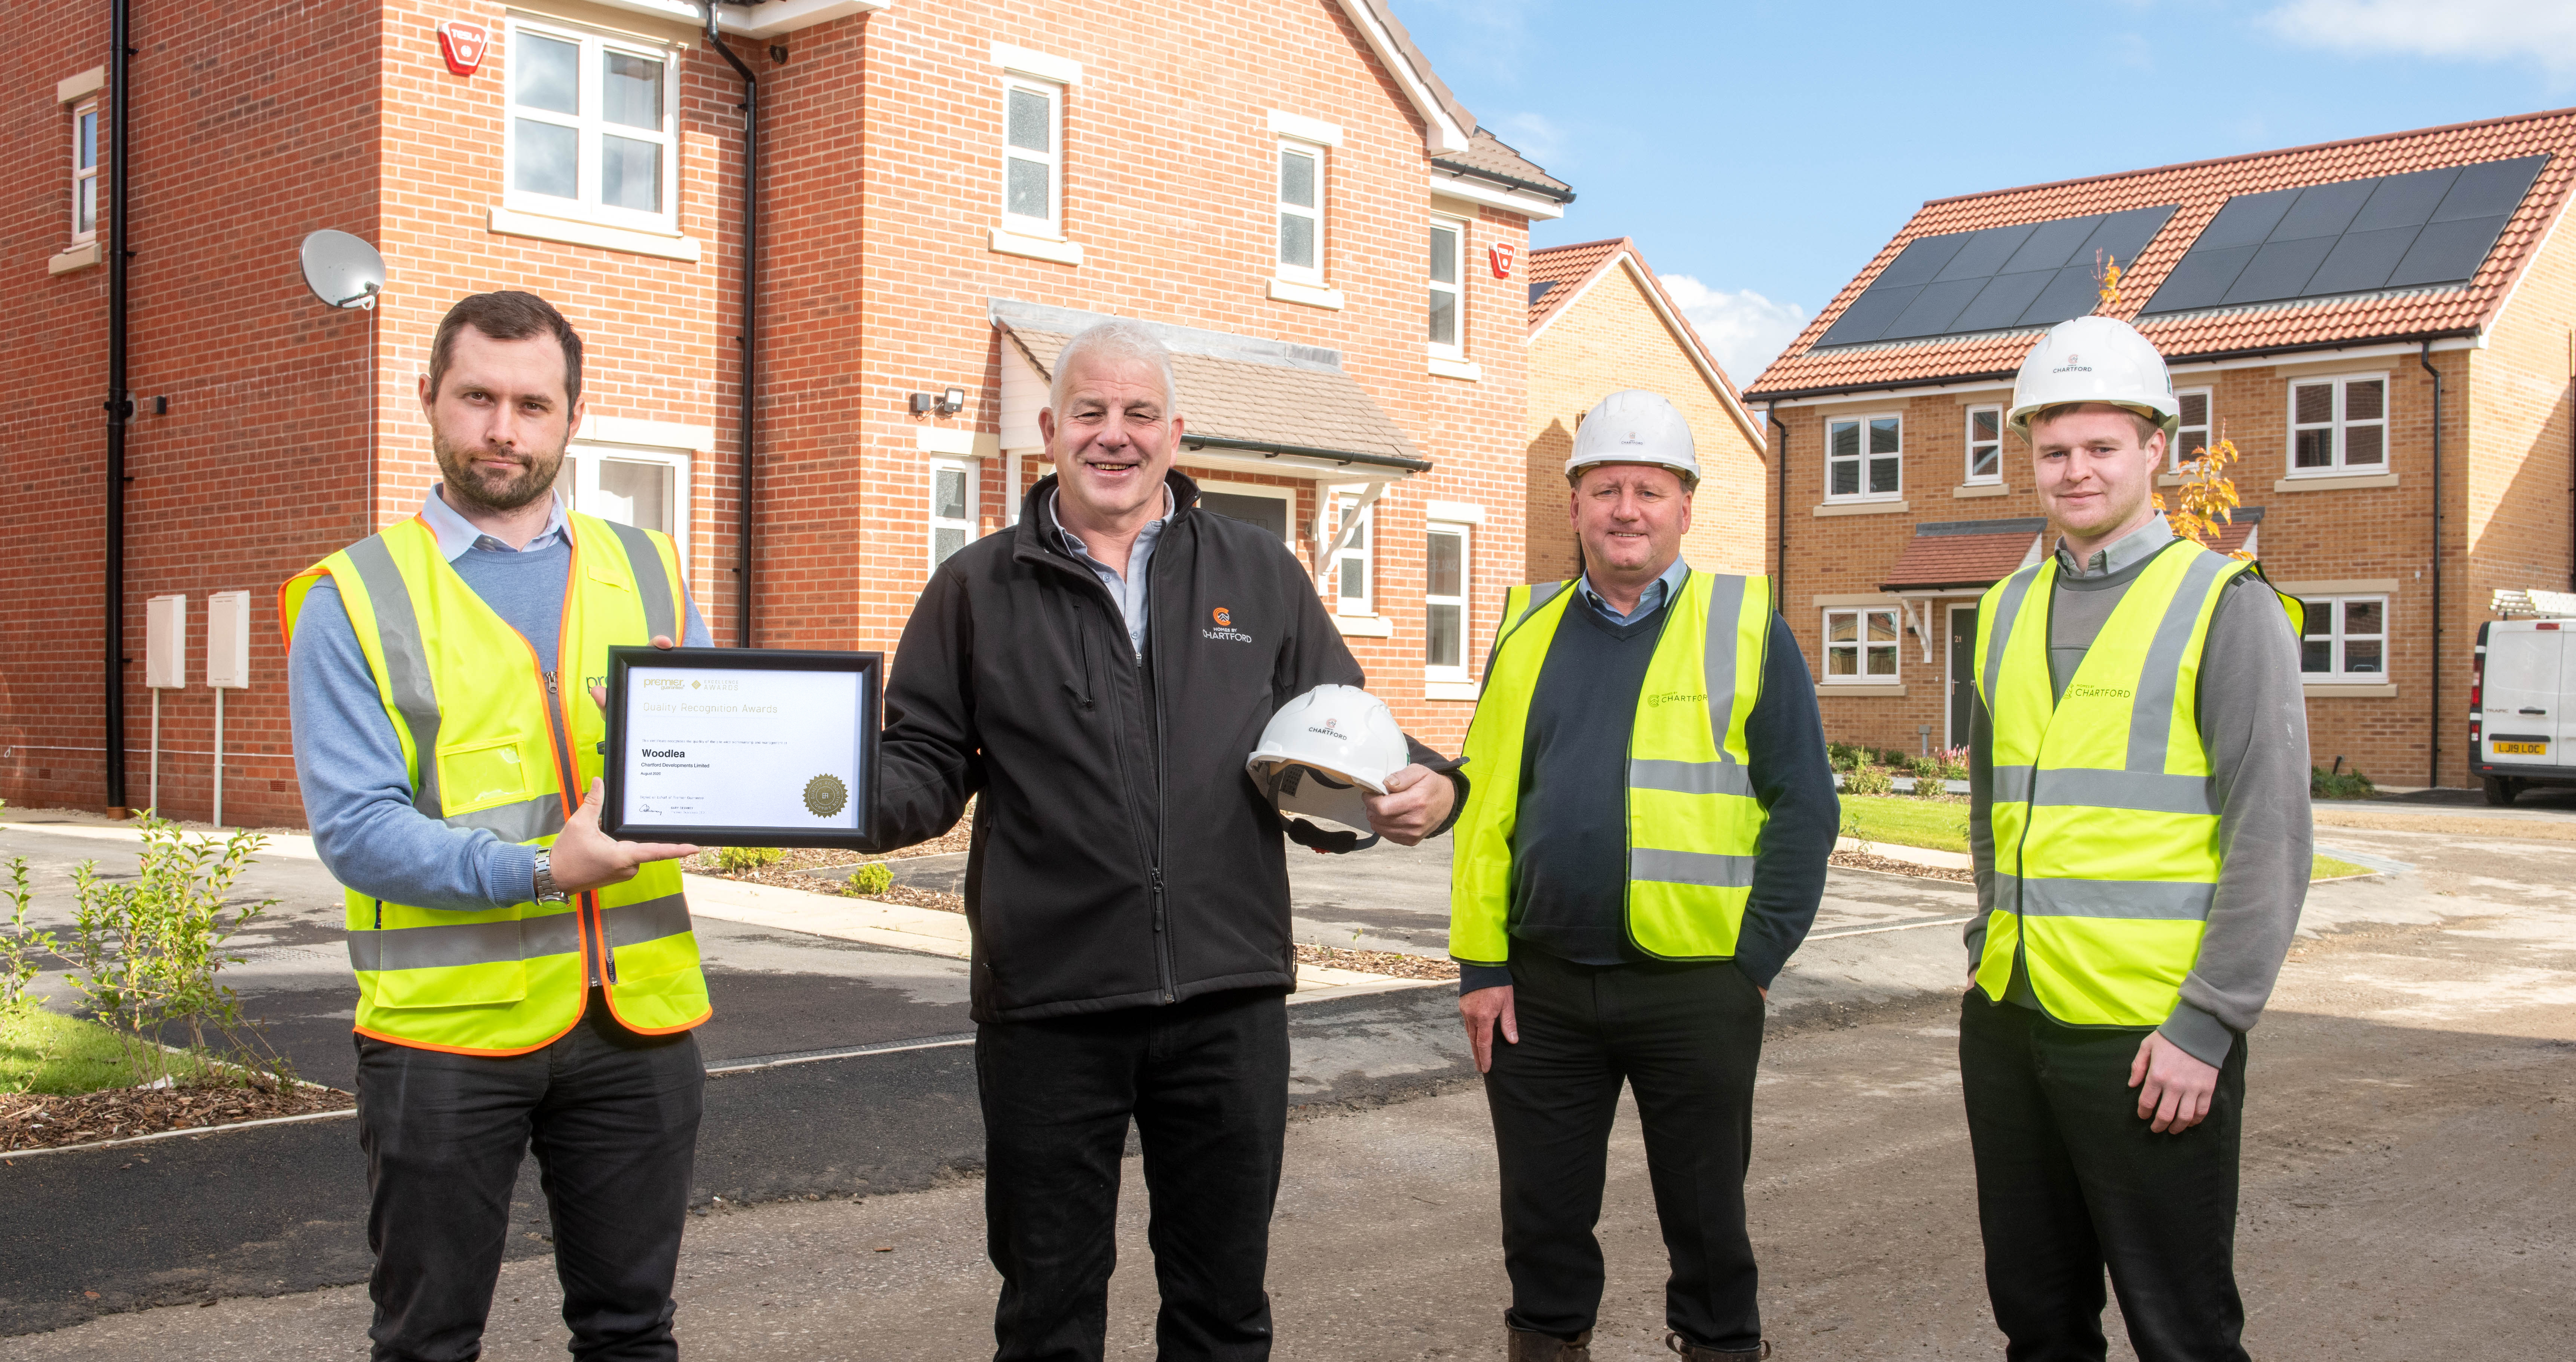 All smiles at our award winning Woodlea Development